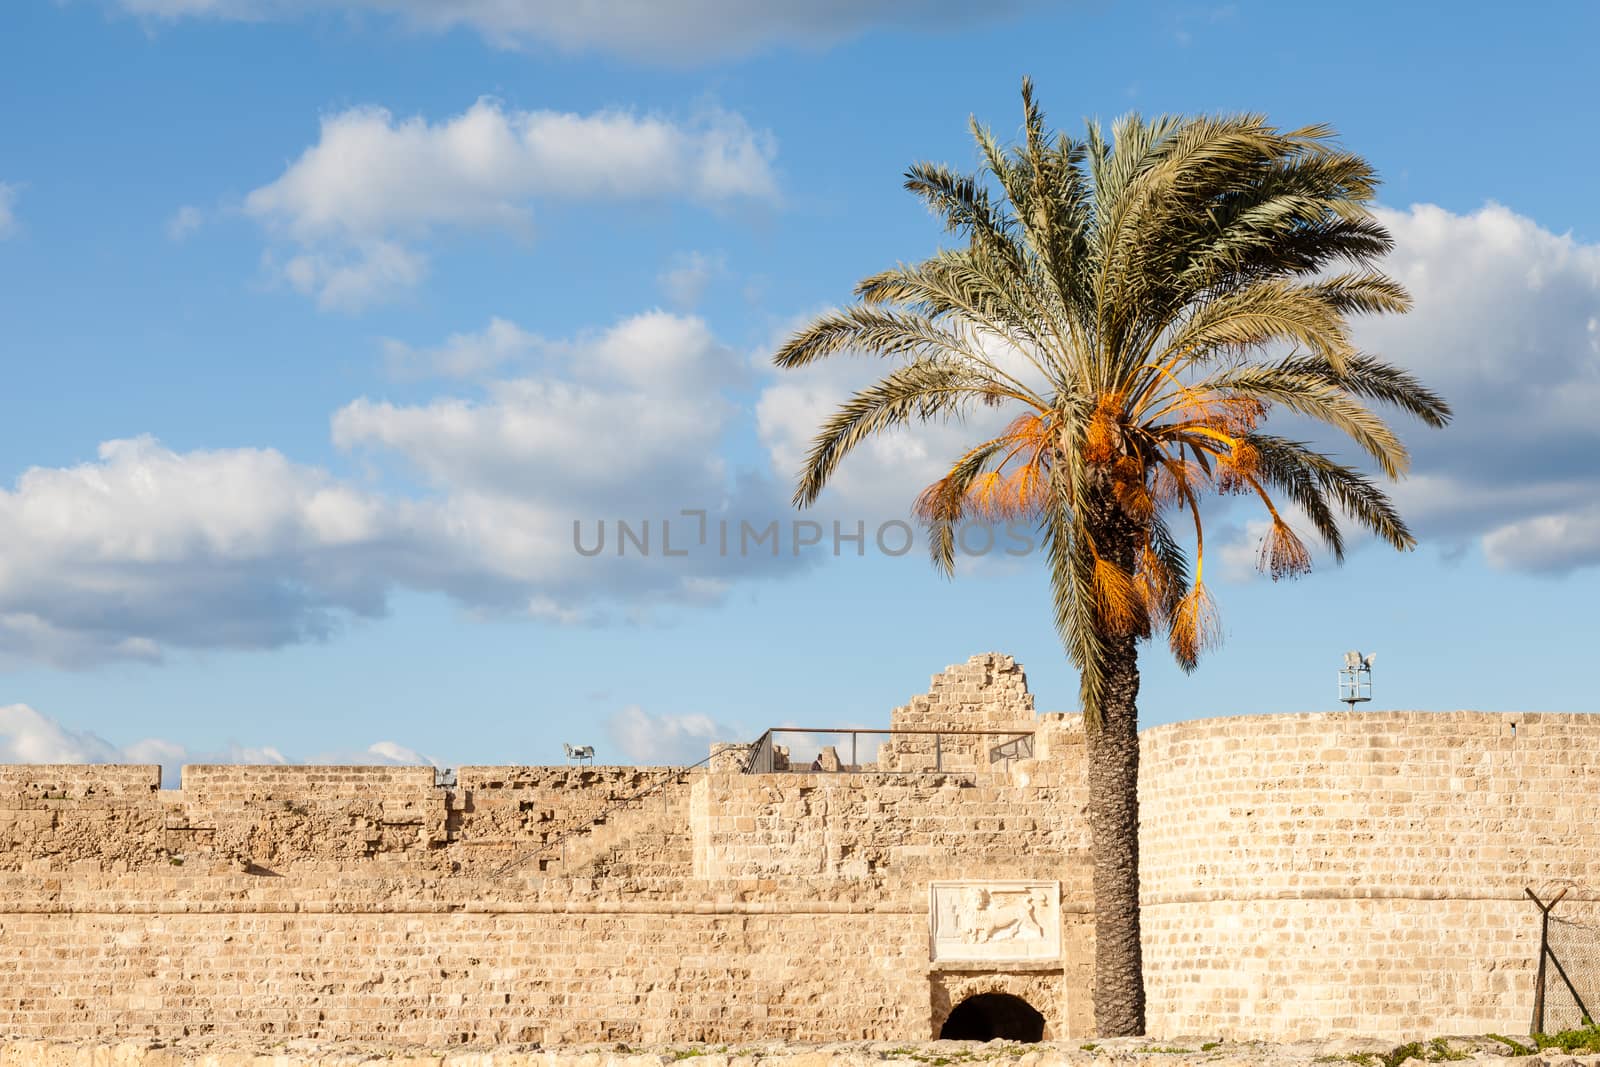 A palm tree is pictured in front of Othello Castle.  The castle is a 14th century castle in Famagusta in the Turkish Republic of Northern Cyprus.